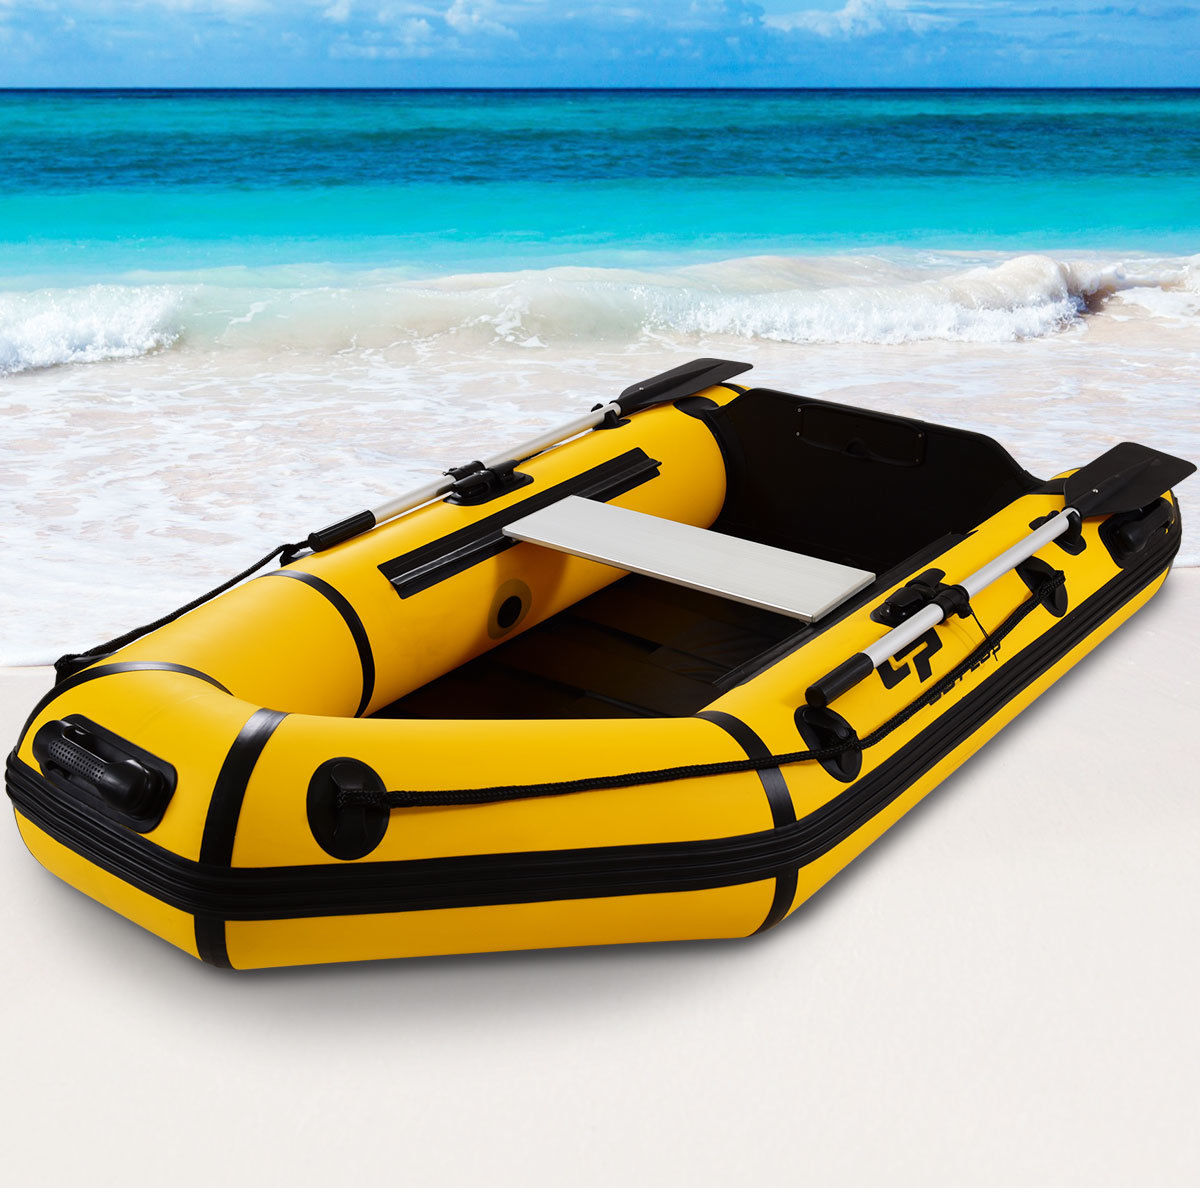 Goplus 2 Person 7.5FT Inflatable Dinghy Boat Fishing Tender Rafting Water (Best Two Person Fishing Boat)